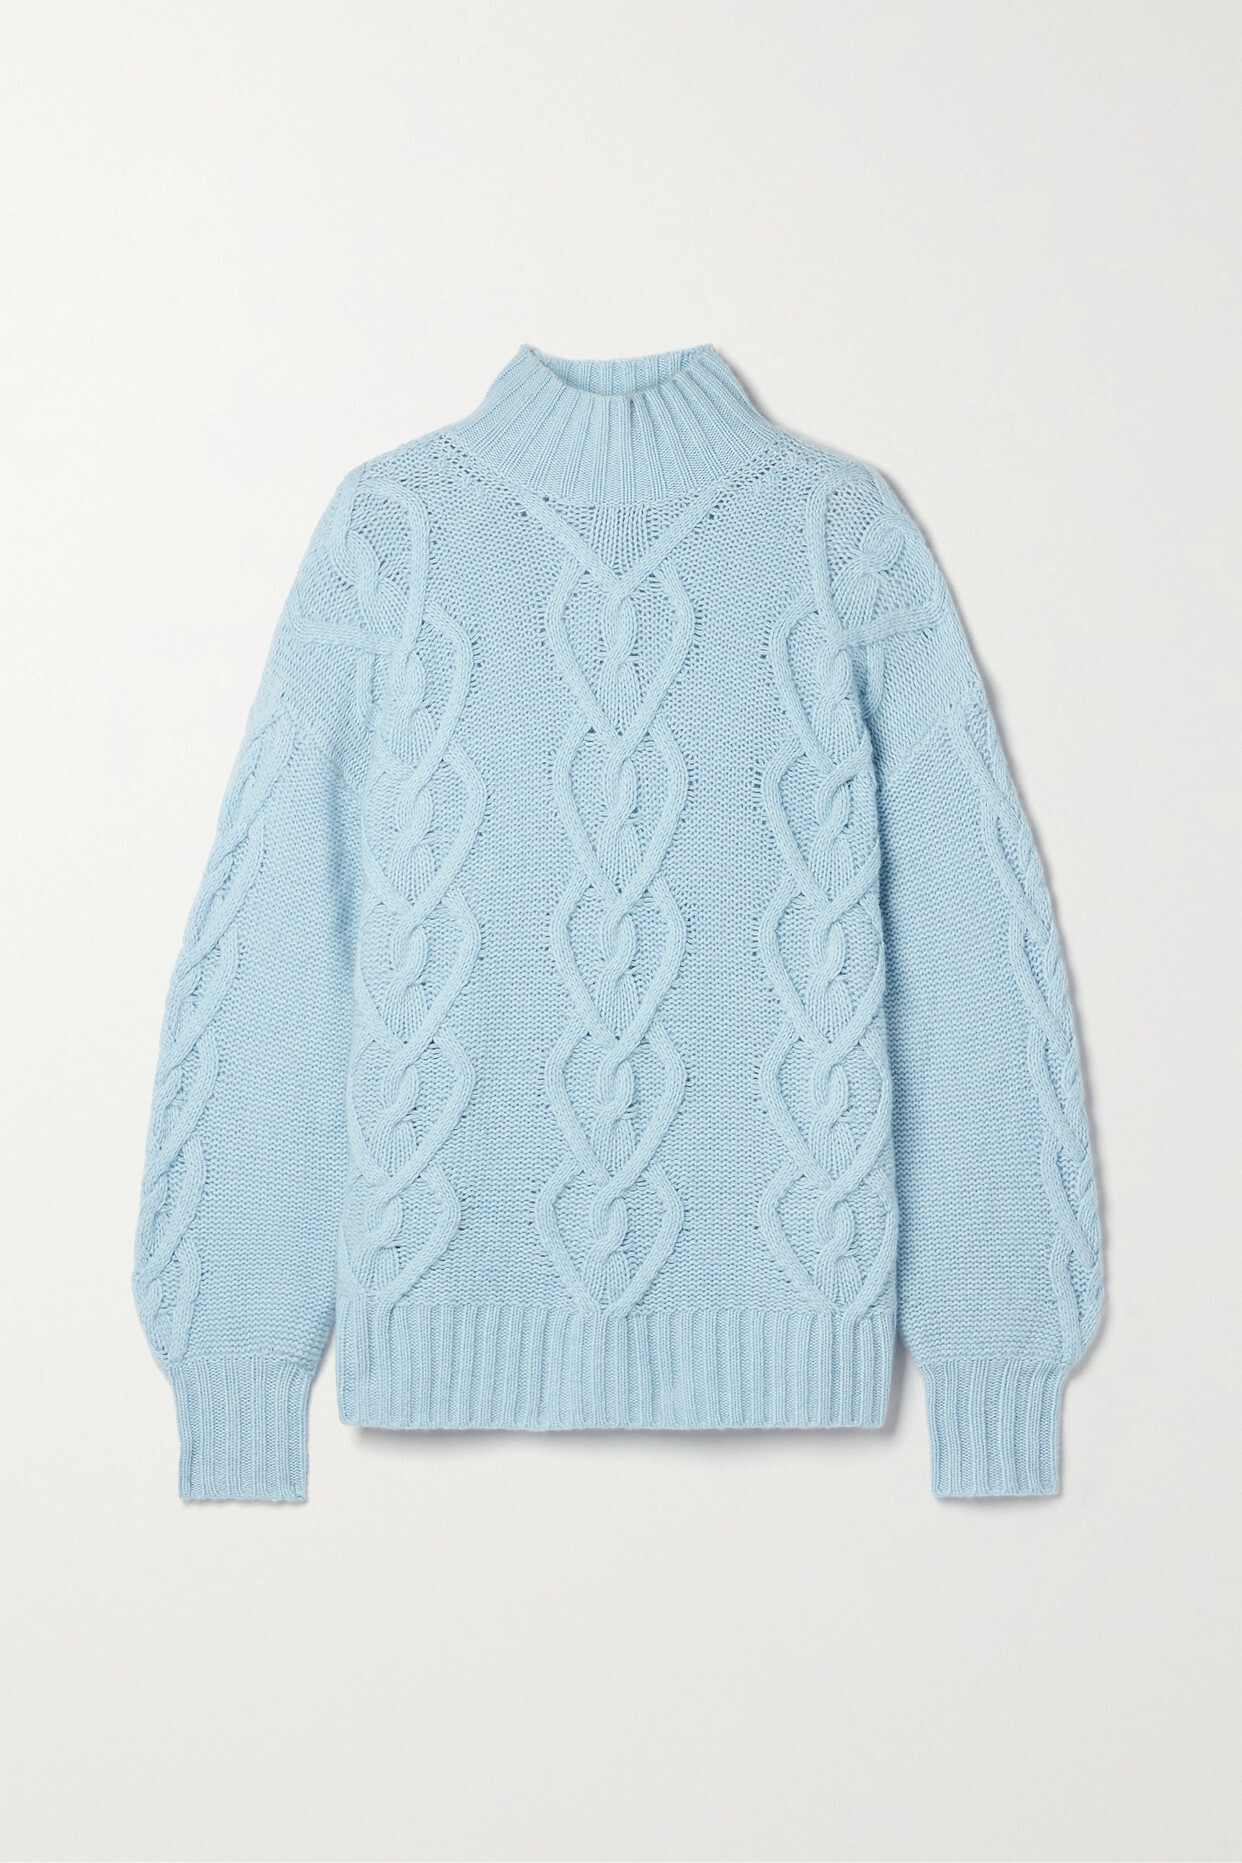 LoveShackFancy - Cable-knit Wool And Cashmere-blend Turtleneck Sweater - Blue